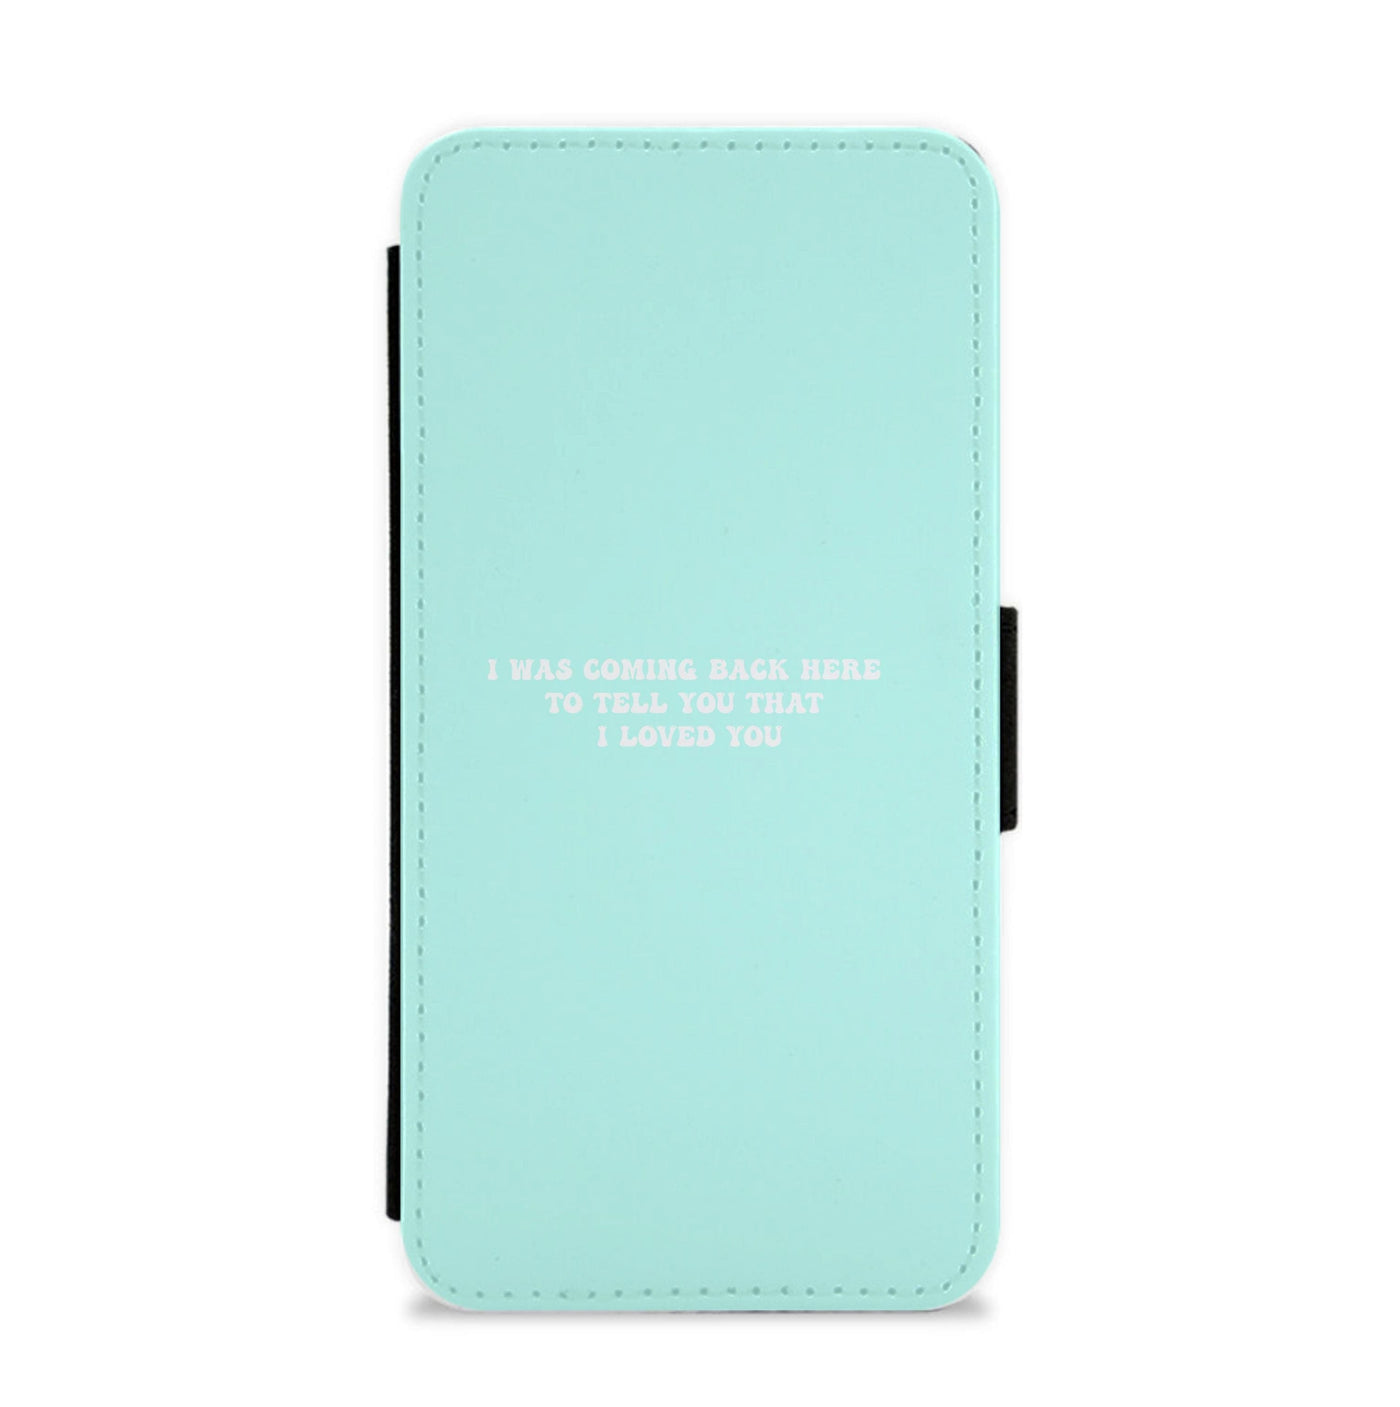 I Was Coming Back Here To Tell You That I Loved You - Islanders Flip / Wallet Phone Case